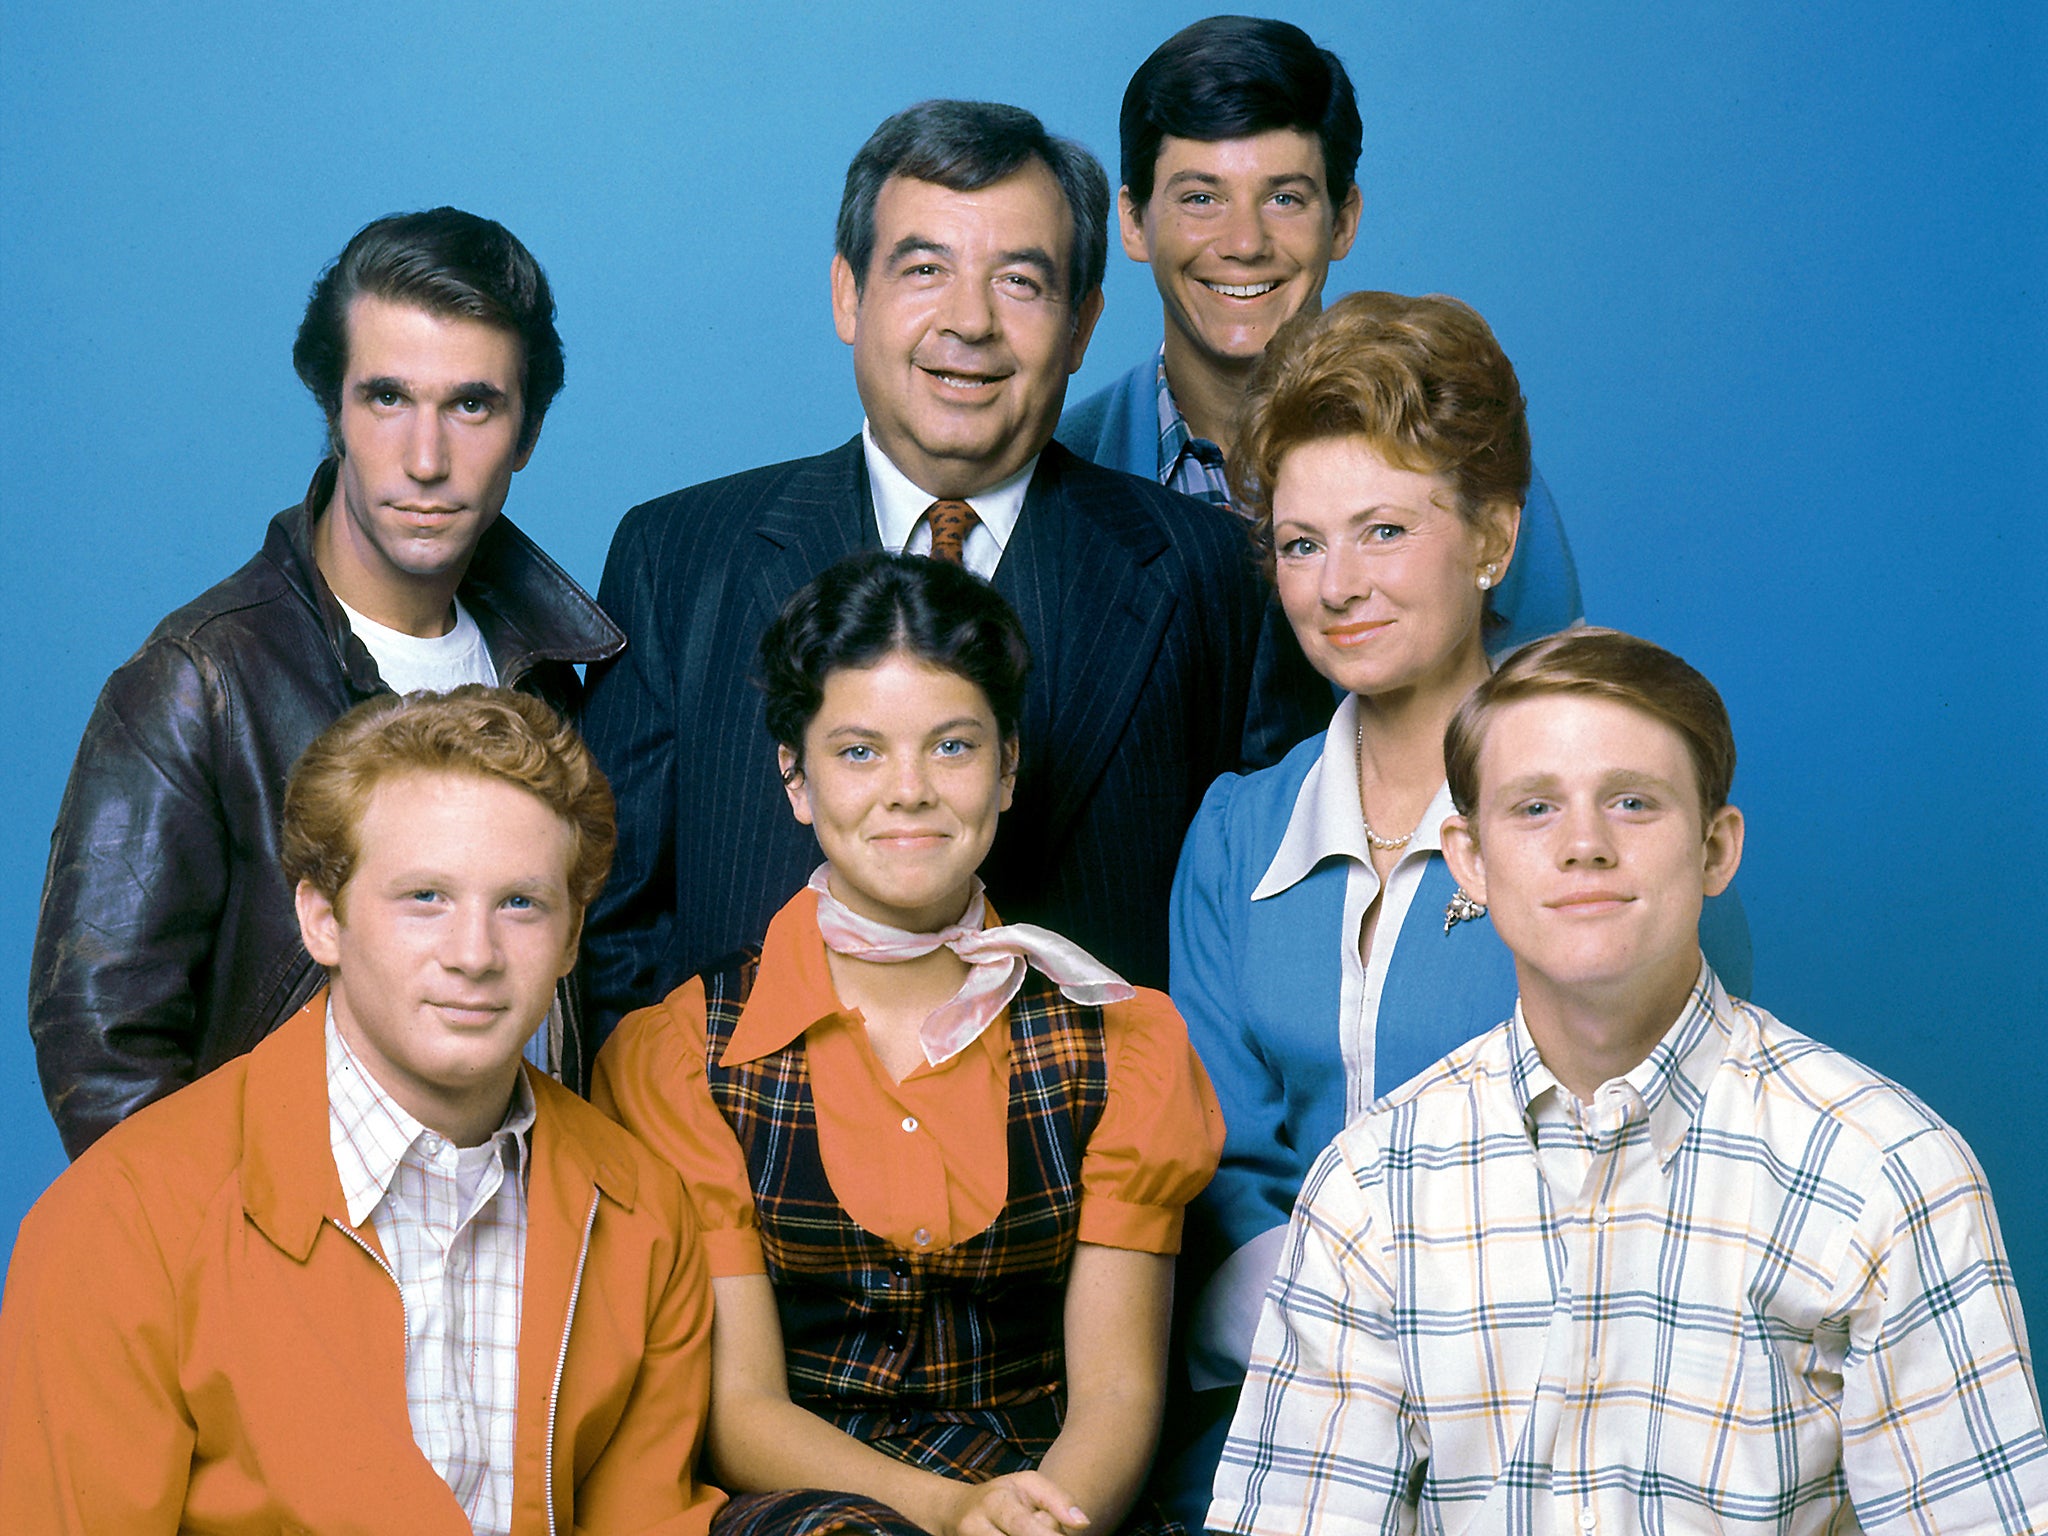 Henry Winkler, Tom Bosley, Anson Williams, Marion Ross, Donny Most, Erin Moran and Ron Howard in Happy Days – 1974-1984